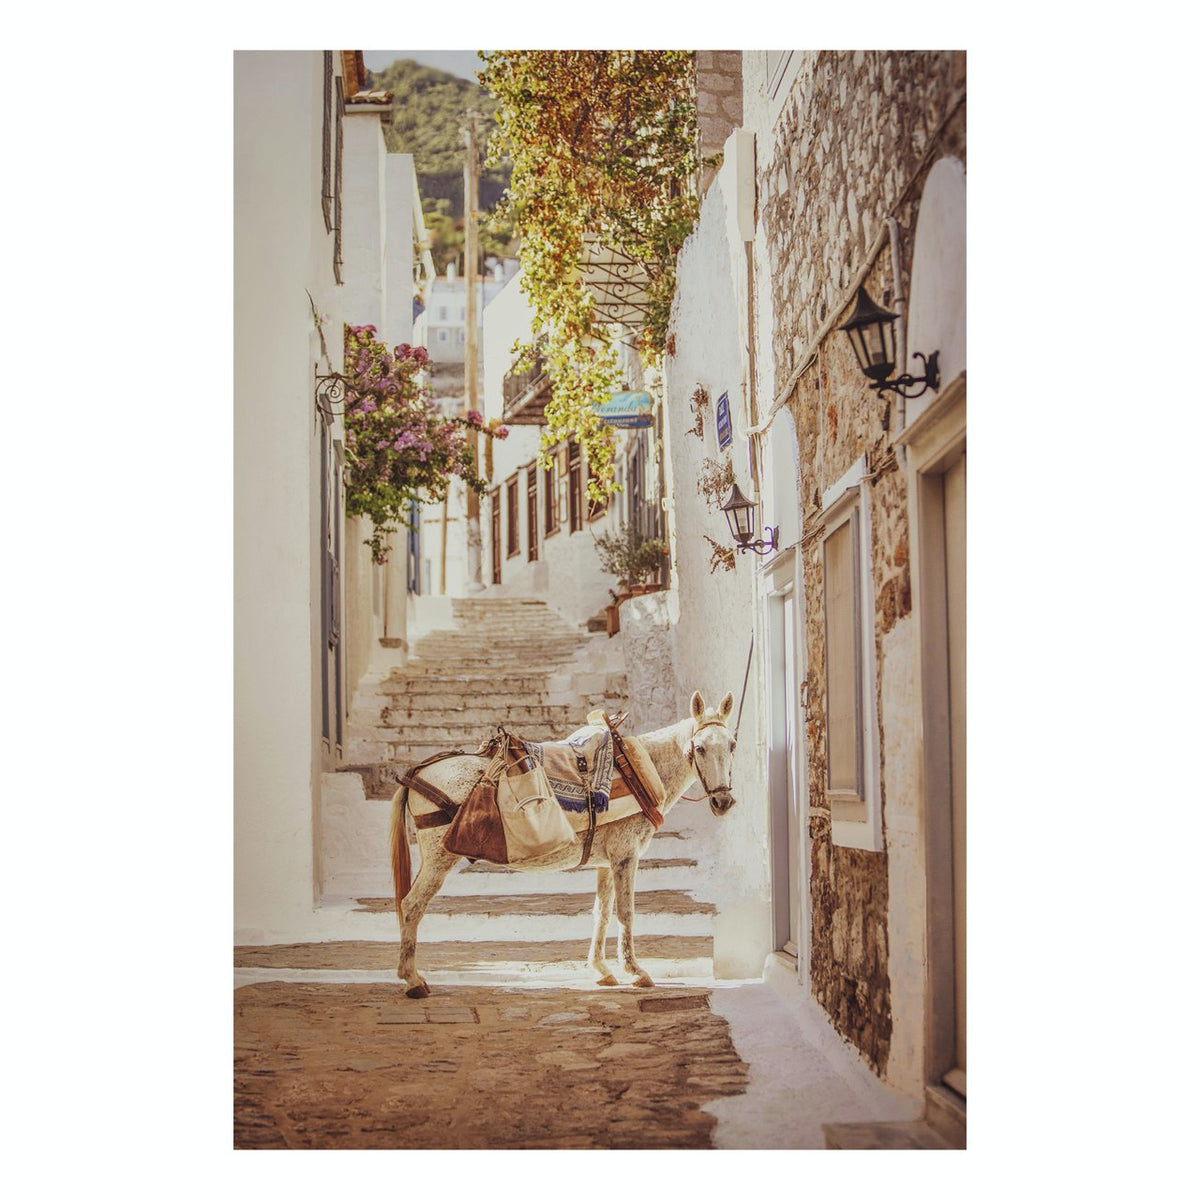 Matted Prints - "Hydra, Greece" | Matted Print